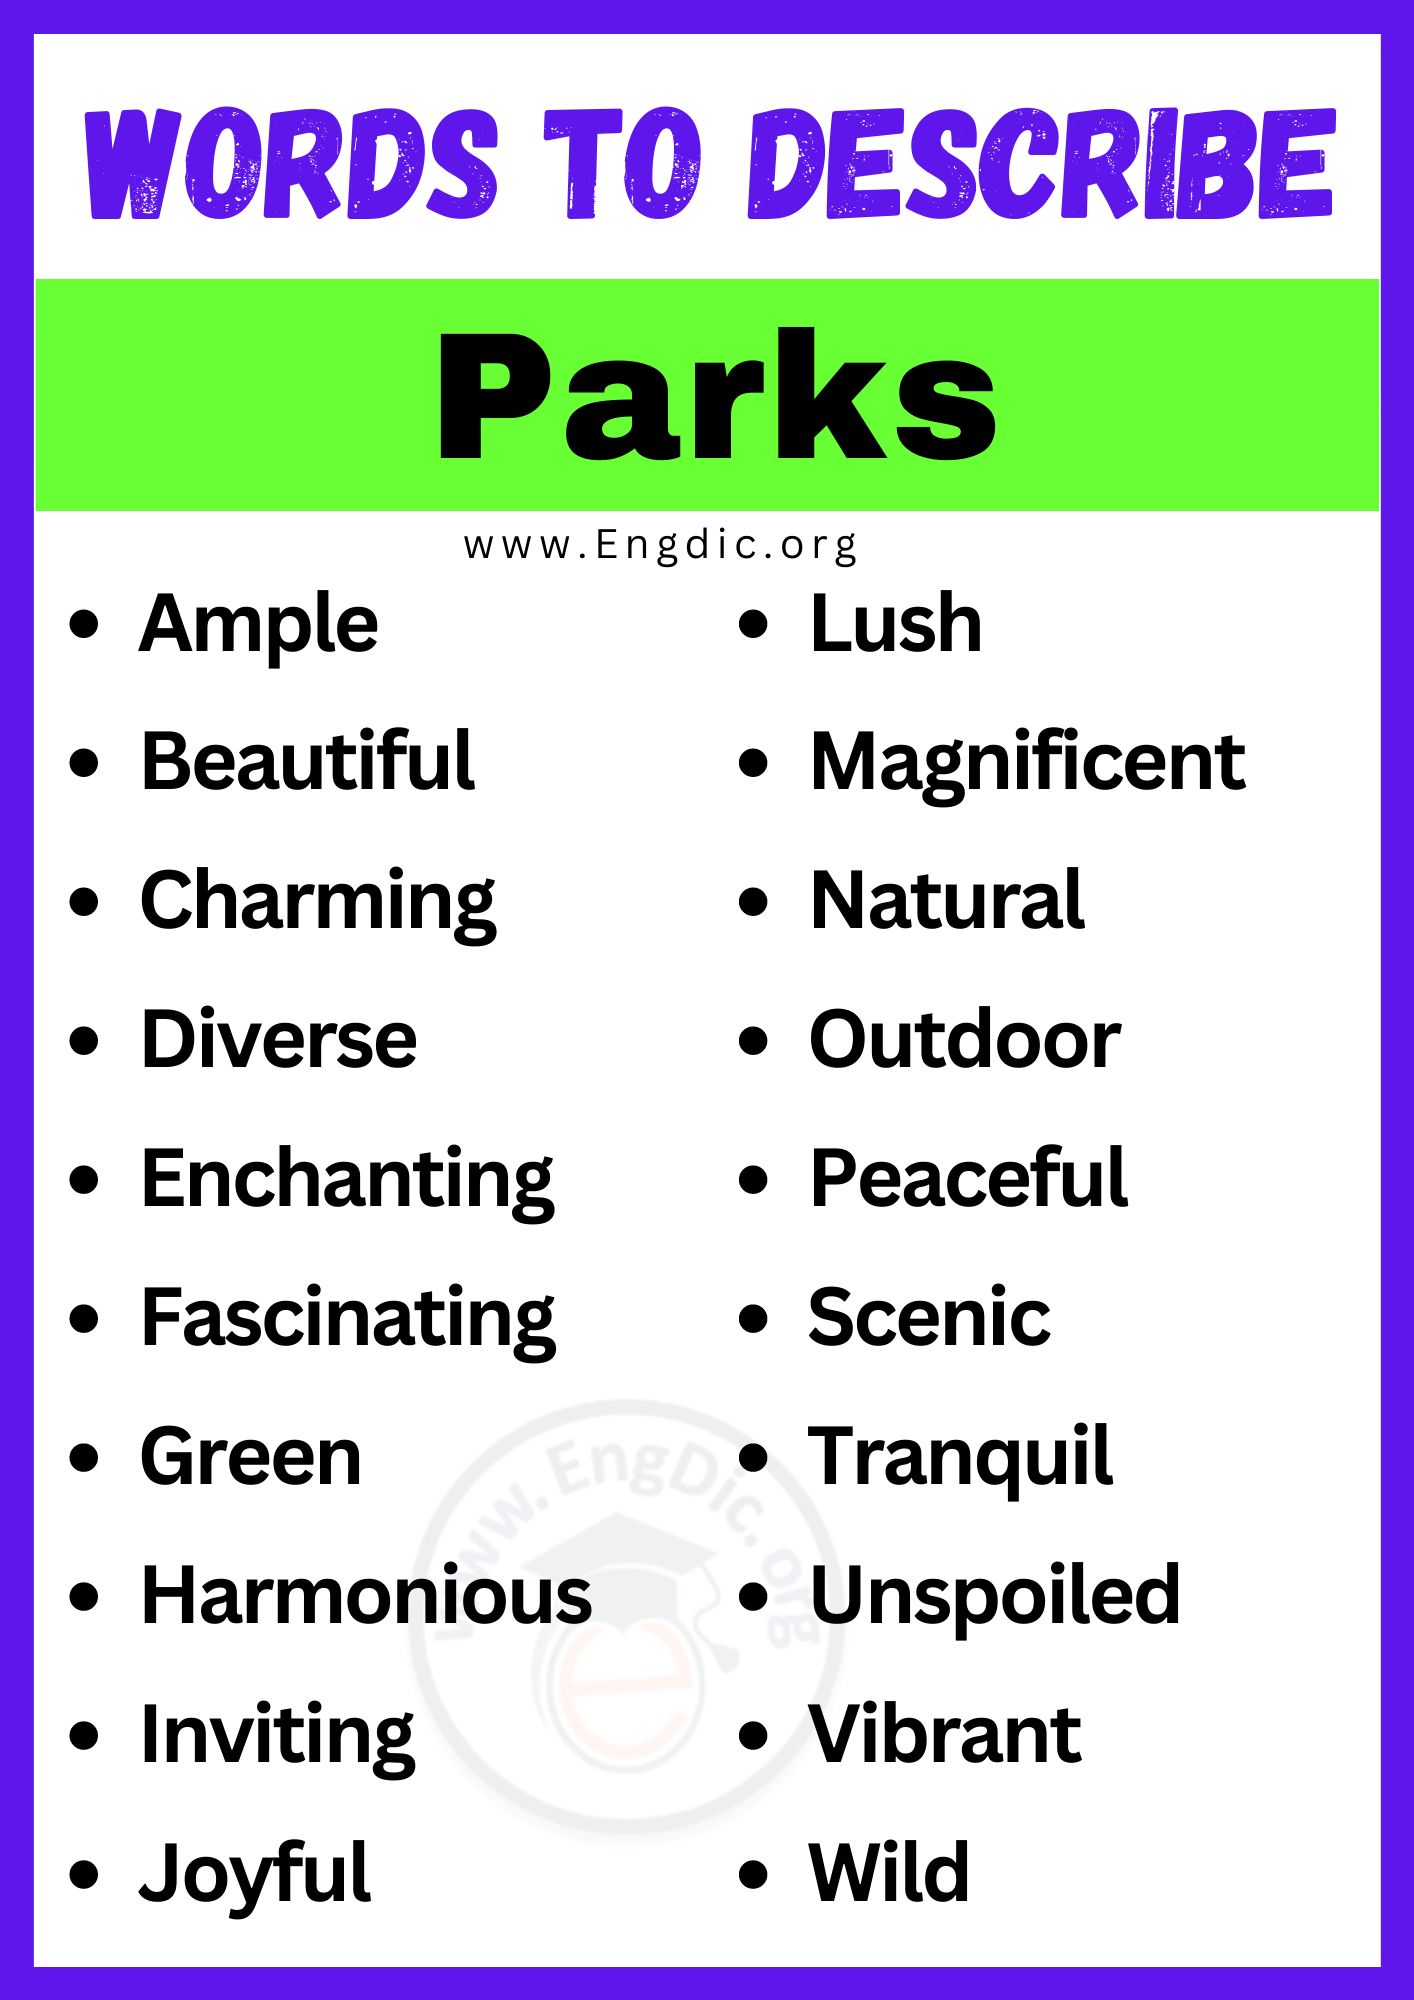 Words to Describe Parks